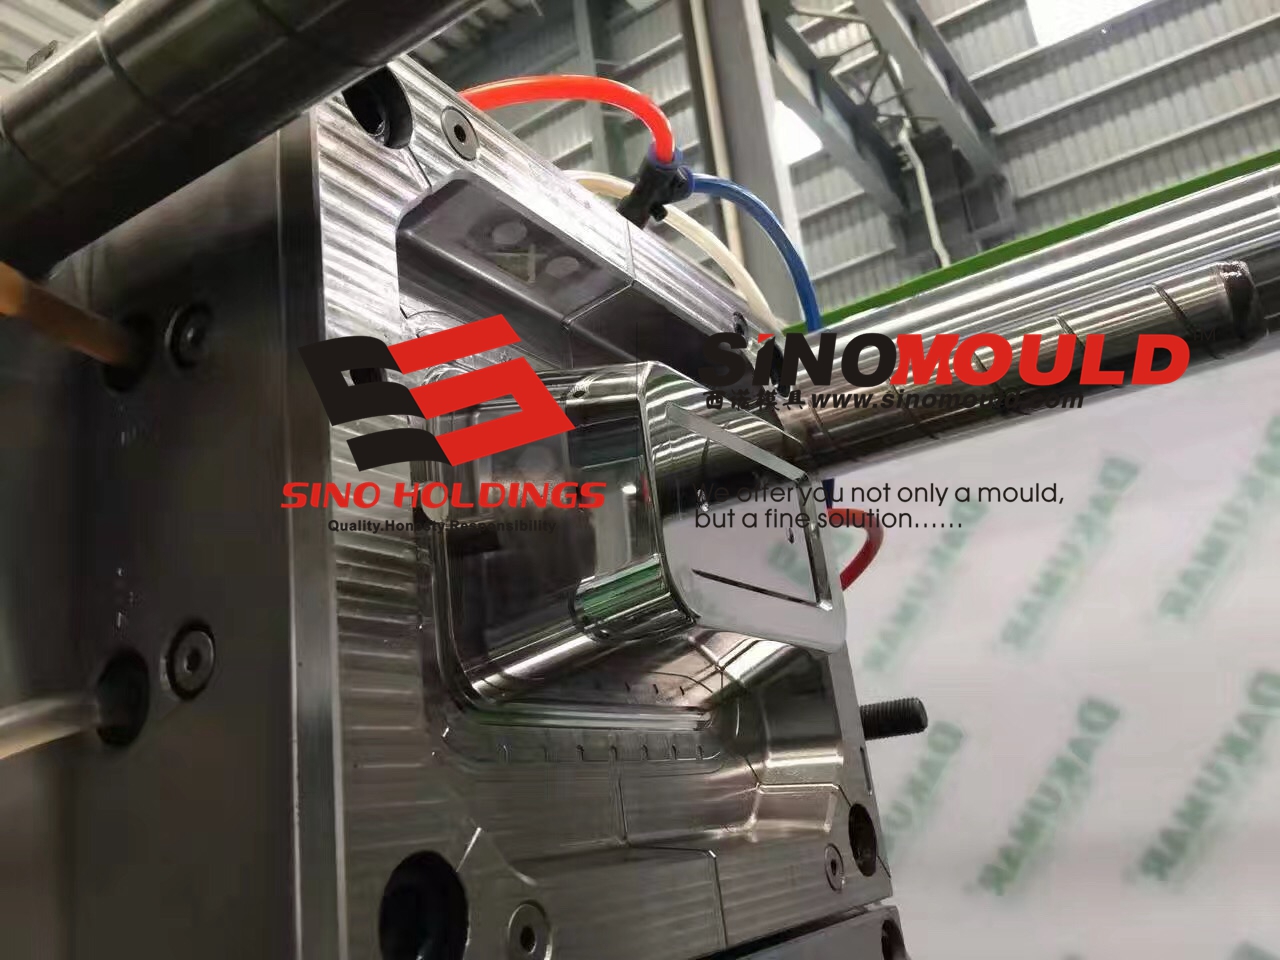 Thin Wall Container Mould